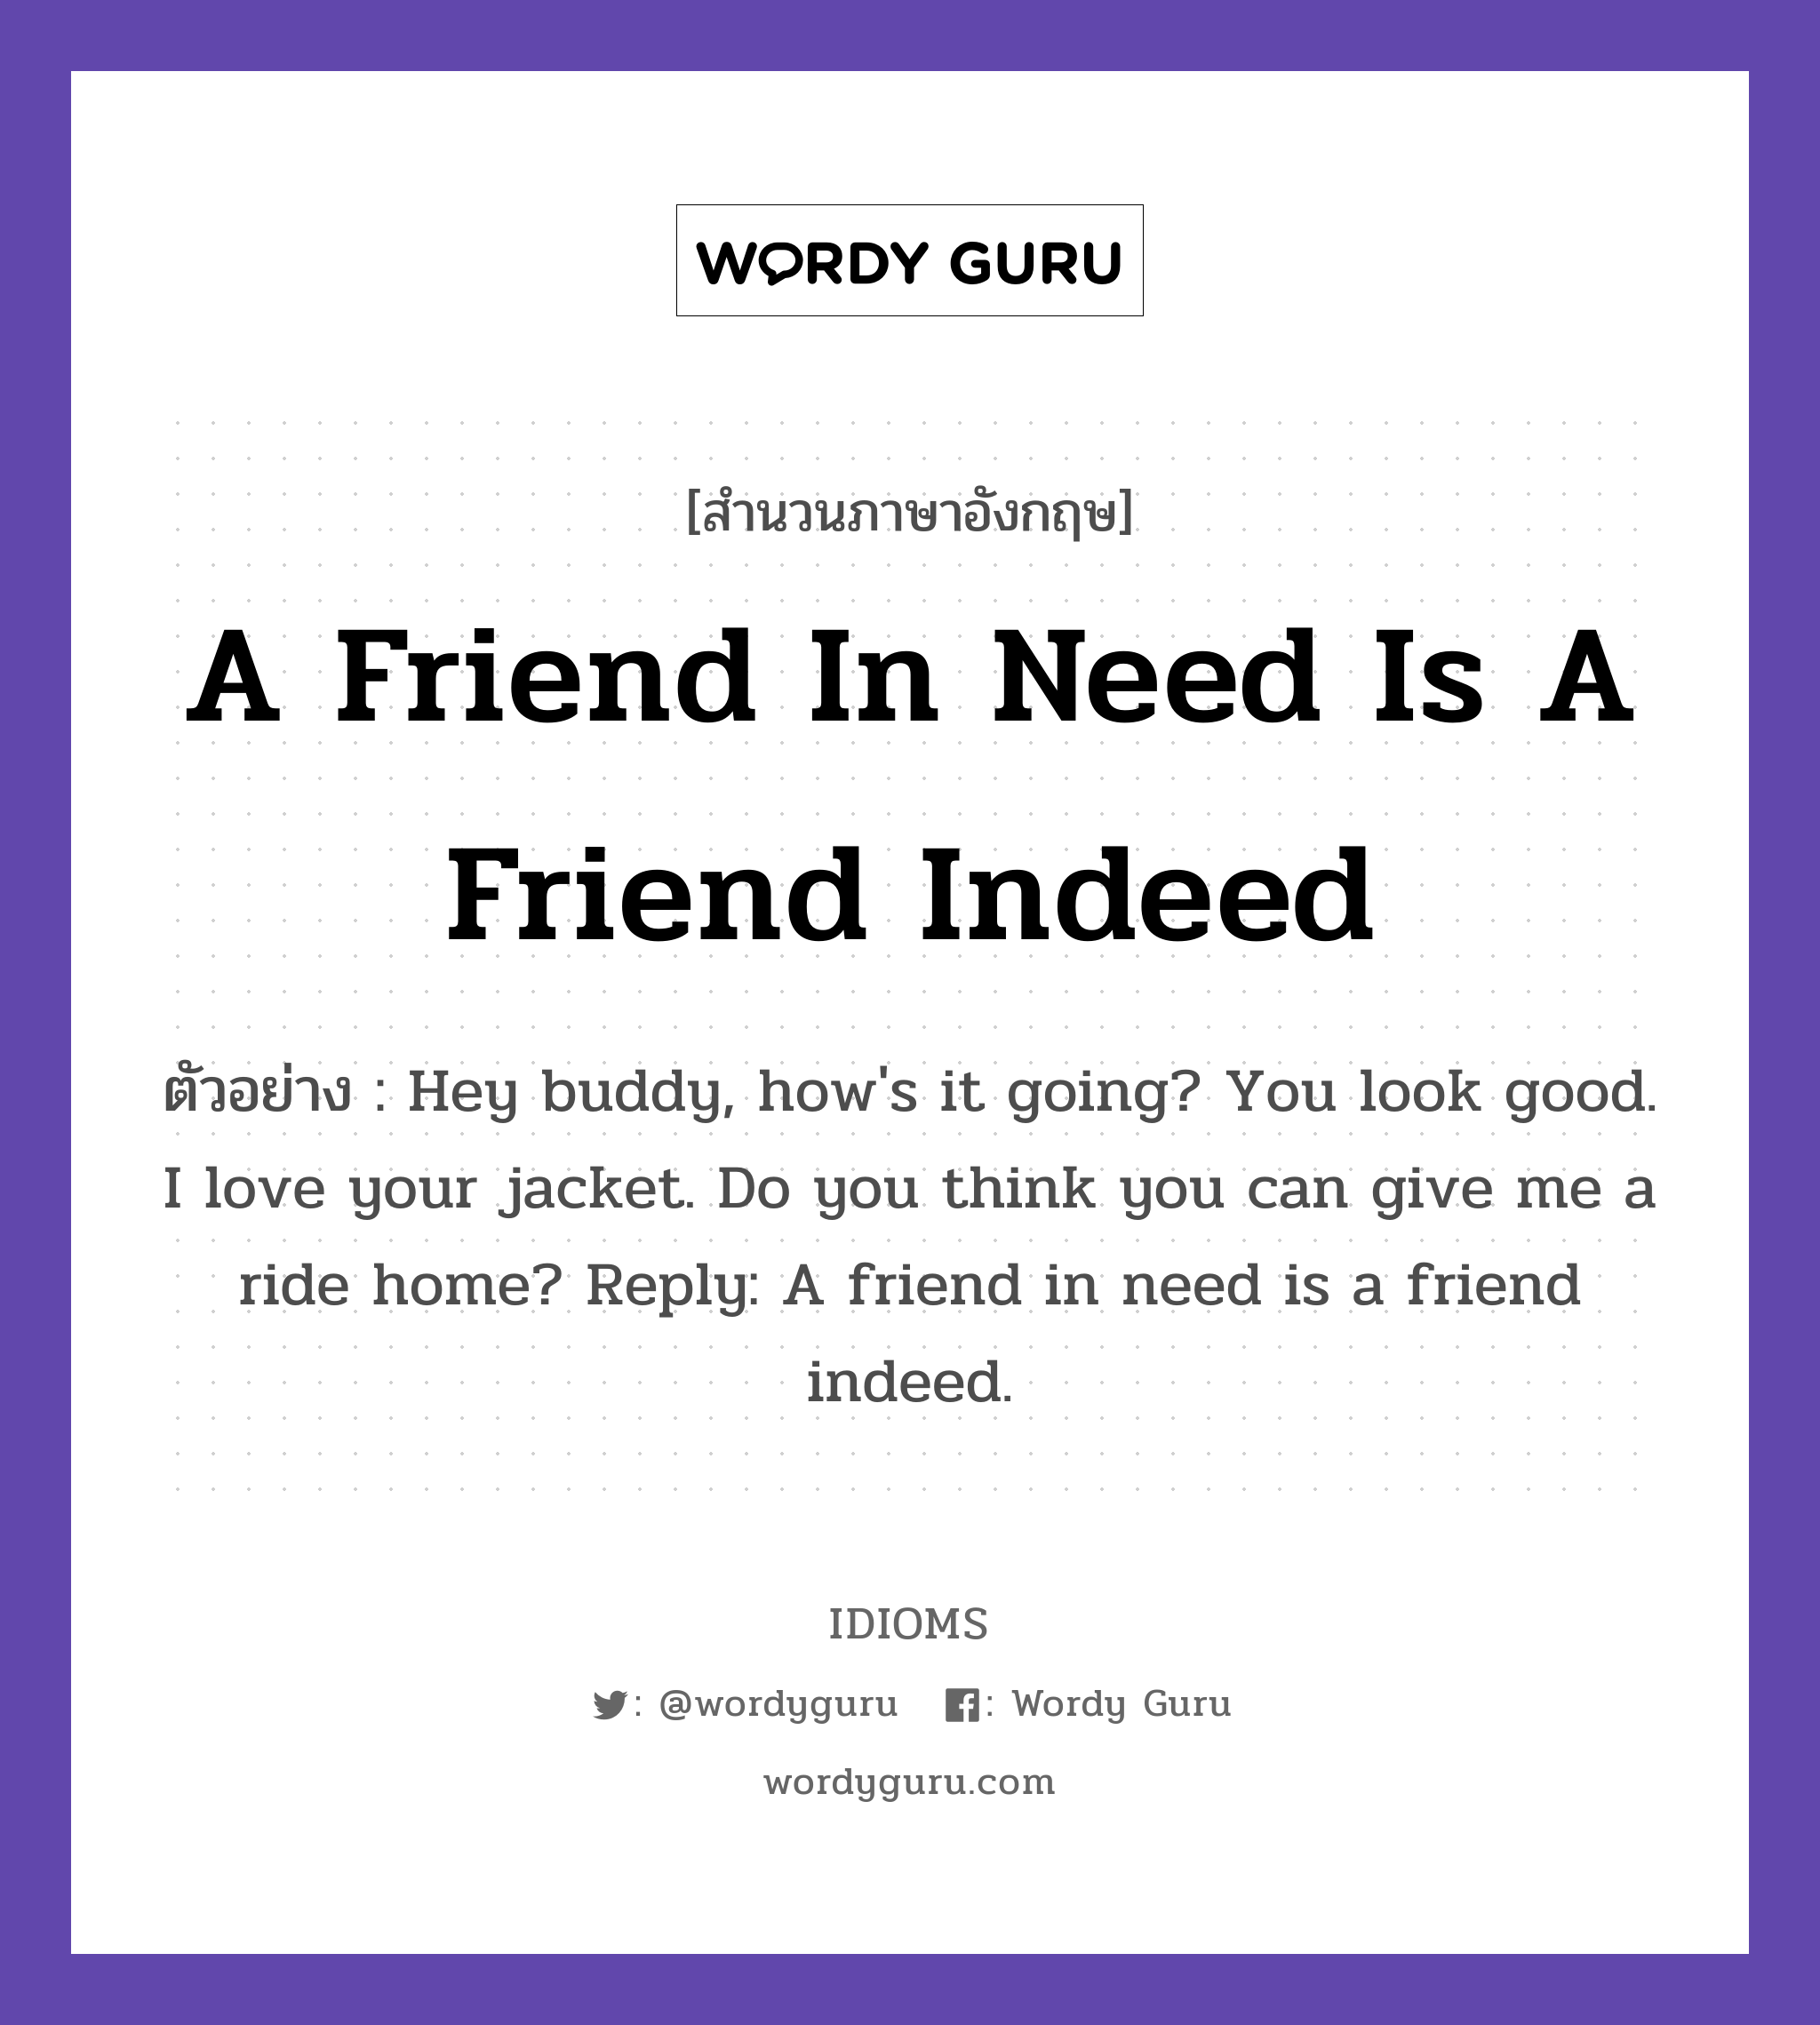 A Friend In Need Is A Friend Indeed แปลว่า?, สำนวนภาษาอังกฤษ A Friend In Need Is A Friend Indeed ตัวอย่าง Hey buddy, how's it going? You look good. I love your jacket. Do you think you can give me a ride home? Reply: A friend in need is a friend indeed.